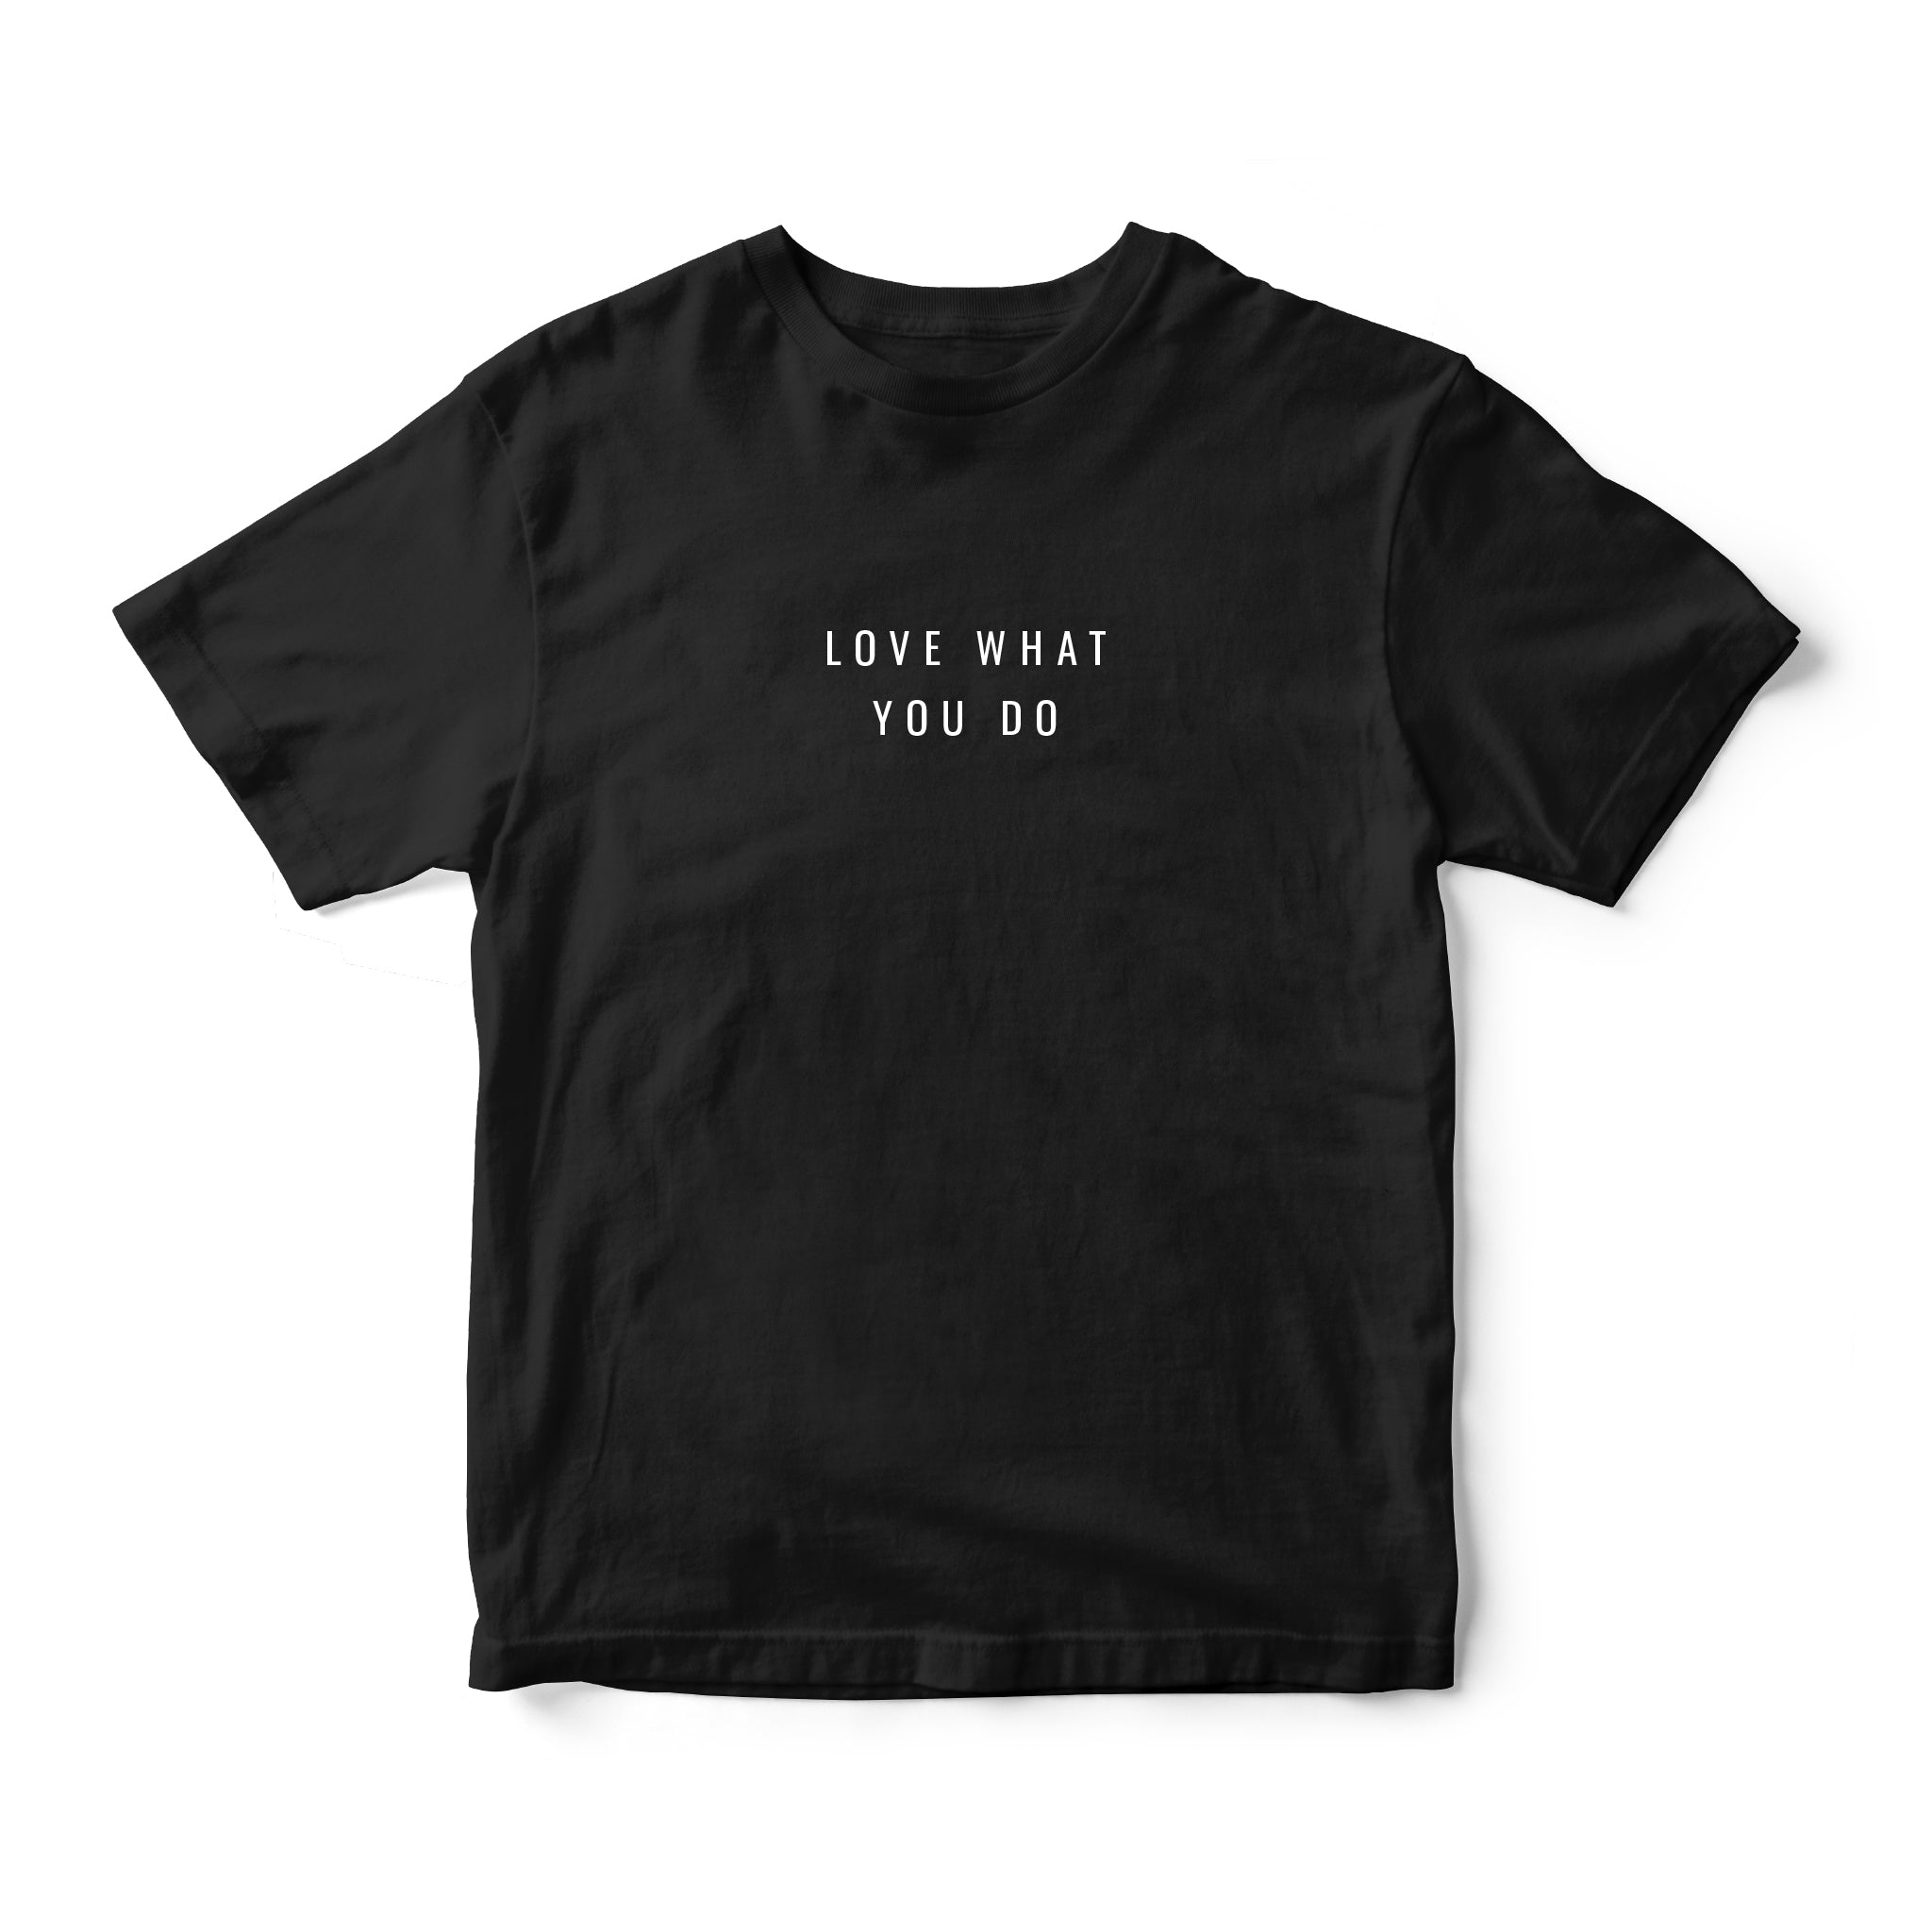 Instee Love What You Do T-shirt Unisex 100% Cotton